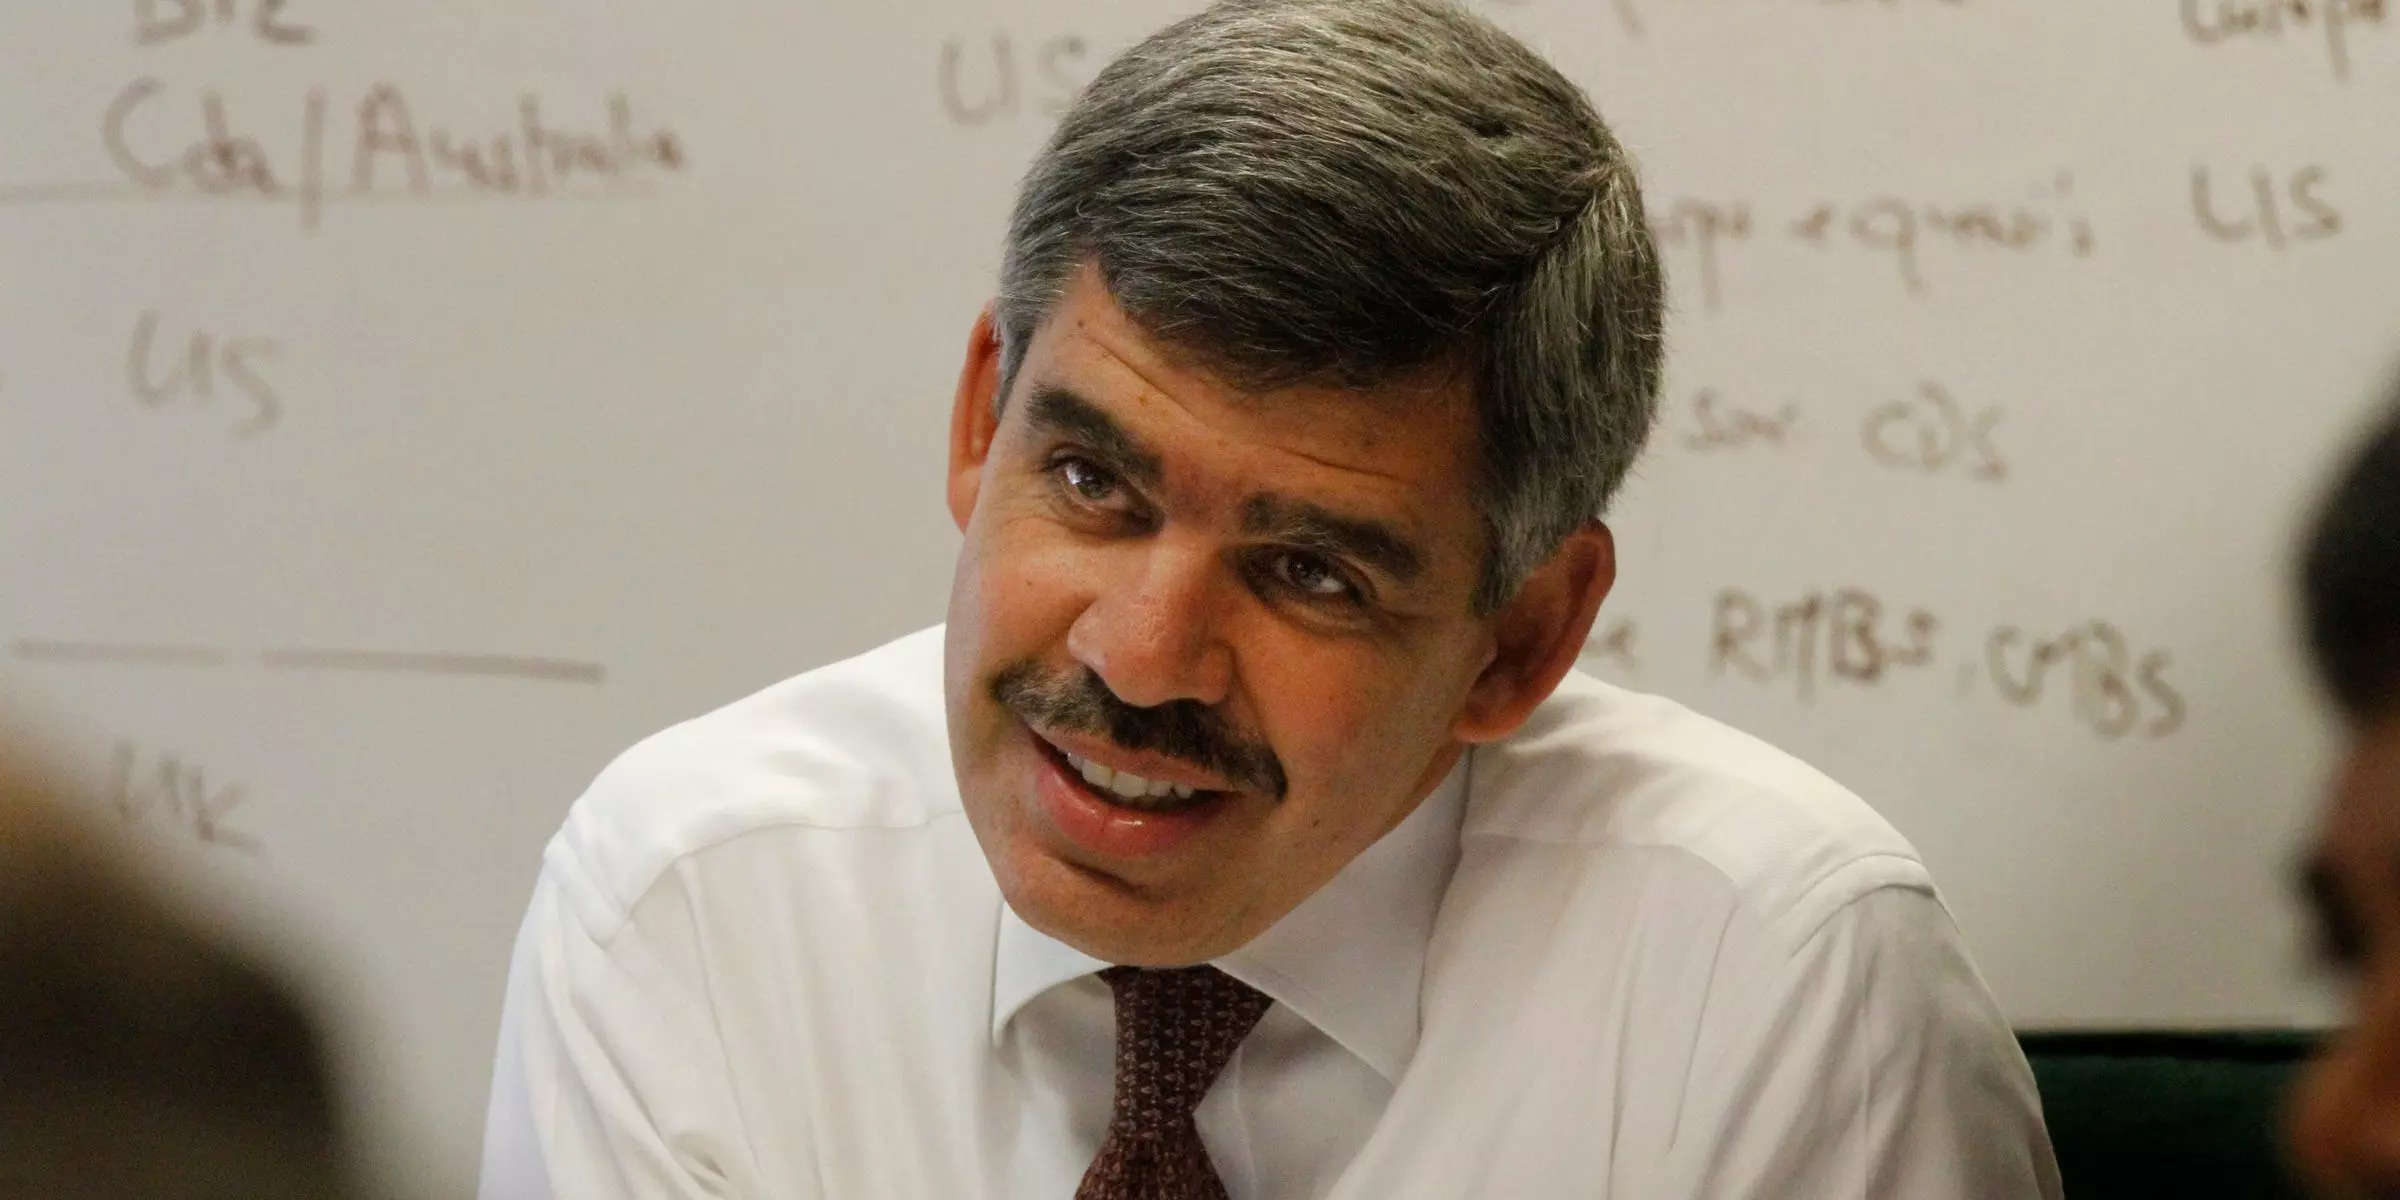 Coming recession won’t be as bad as 2008 if Fed can avoid more policy mistakes, says Mohamed El-Erian